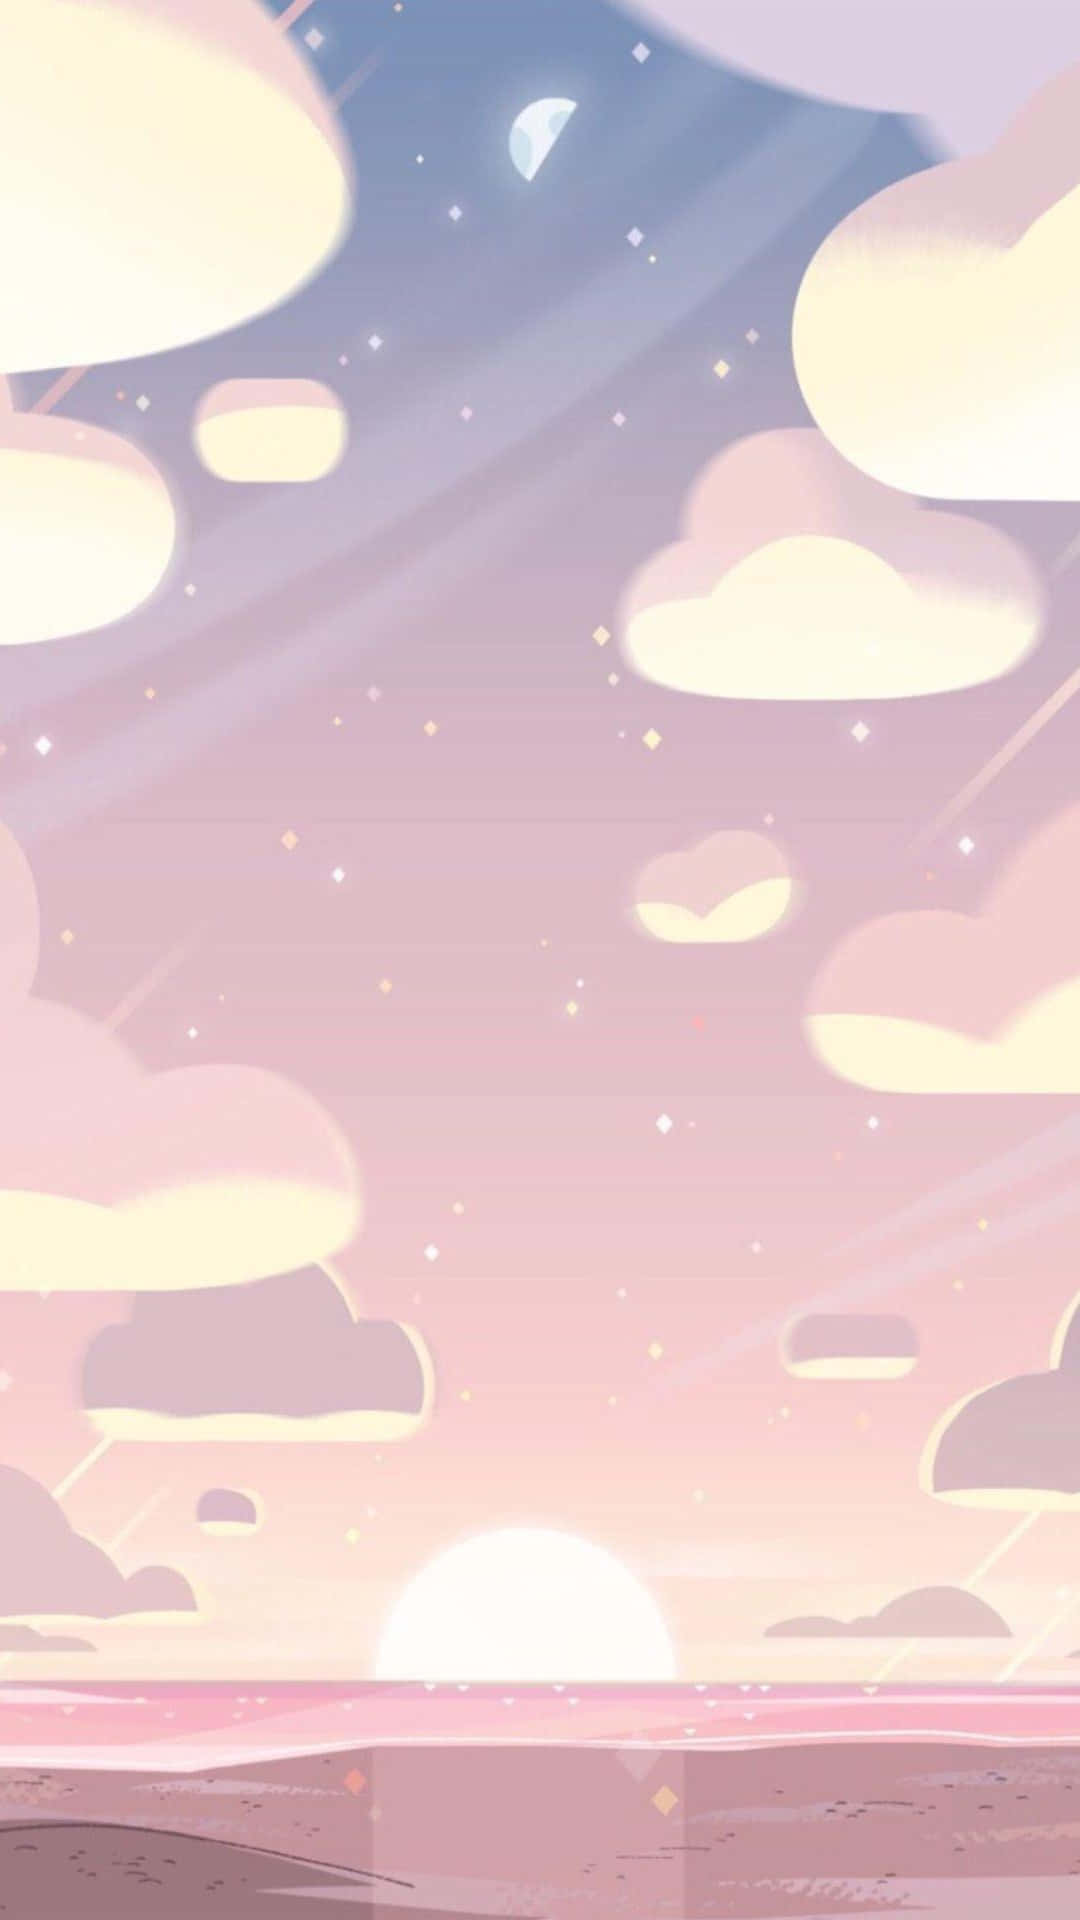 A Cartoon Sunset With Clouds And A Sun Wallpaper